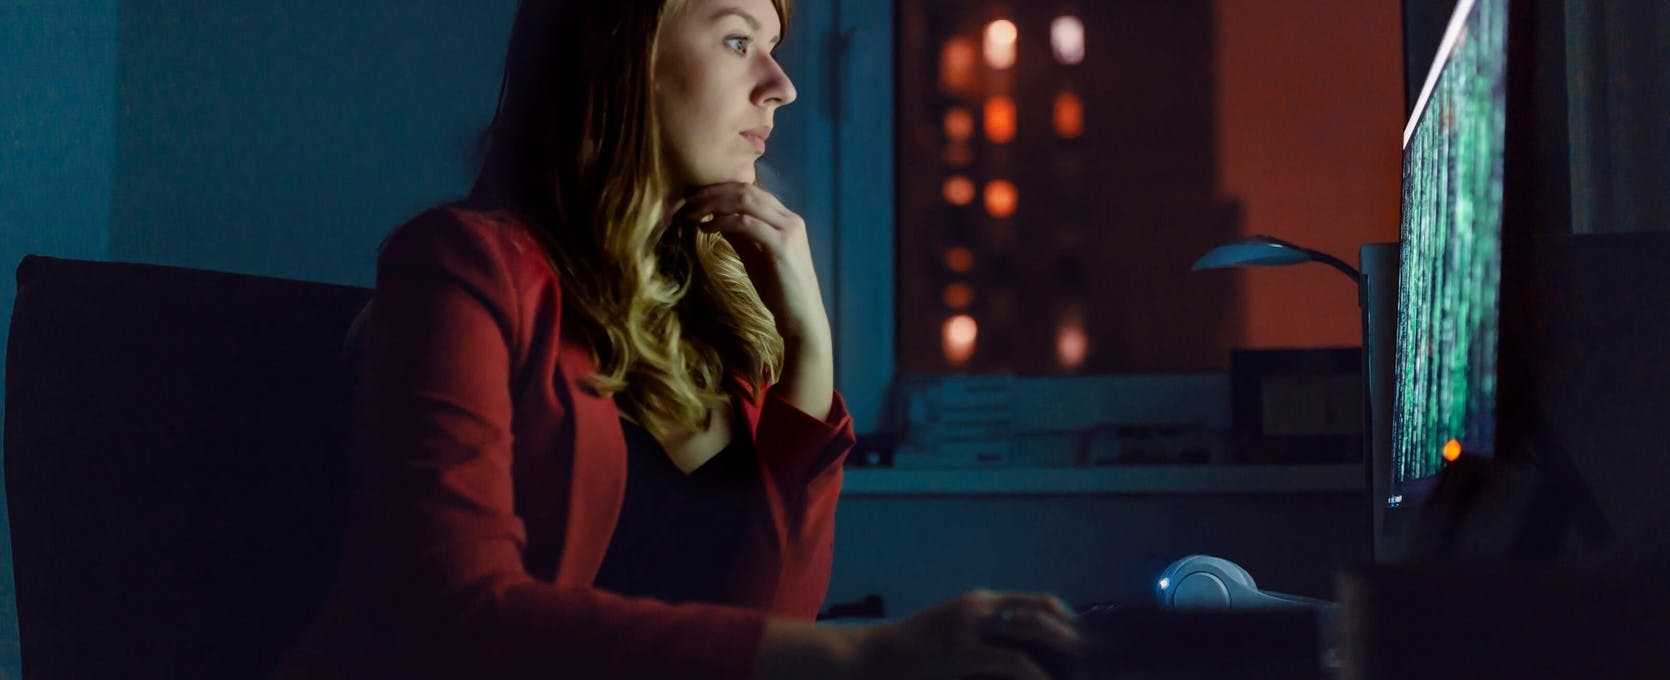 Woman works on computer at night